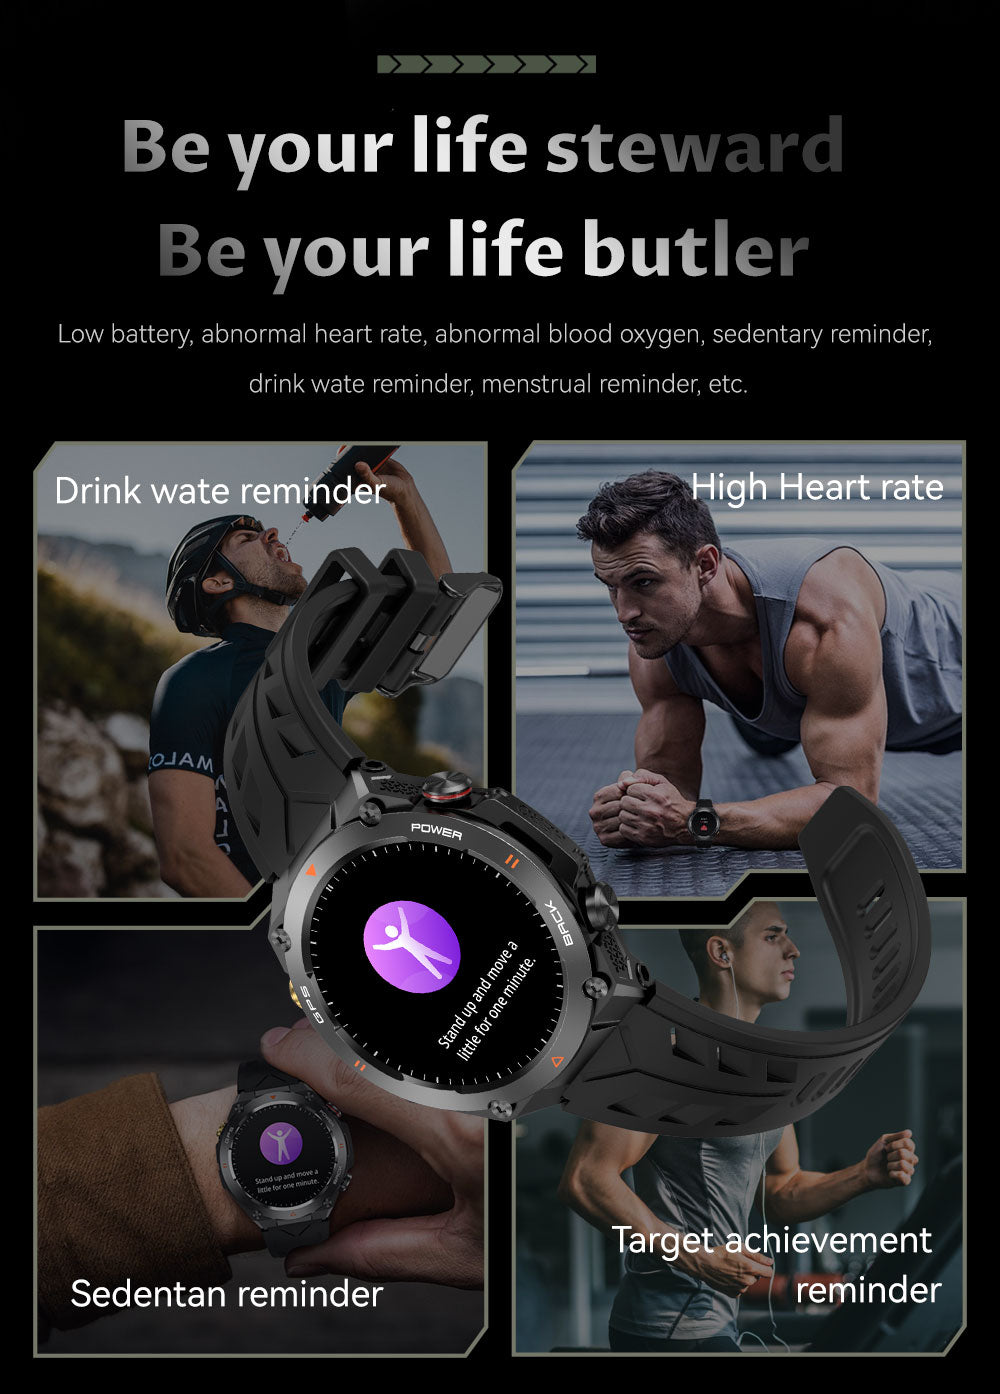 【SACOSDING】Military Smart Watches for Men, 5ATM Waterproof Rugged Smart Watch with Bluetooth Call (Answer/Dial Call), 1.41” HD IP68 Fitness Tracker Watch with 100+ Sport Modes for Android/iOS Phone